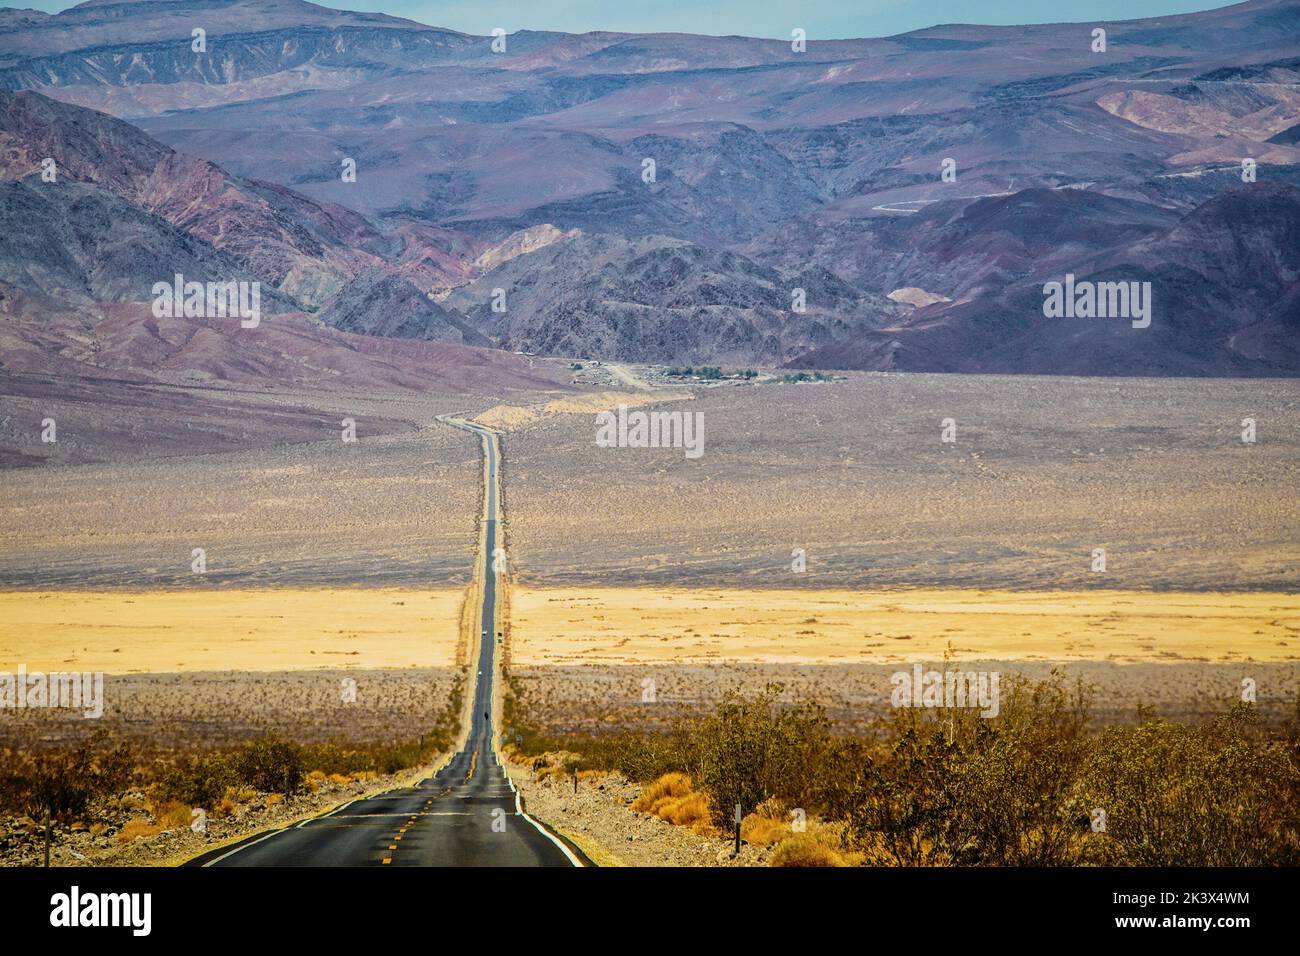 Two lane blacktop highway wavering in the heat  stretching into the distant mountains with band of sand intersecting the rough textured sagebrush terr Stock Photo